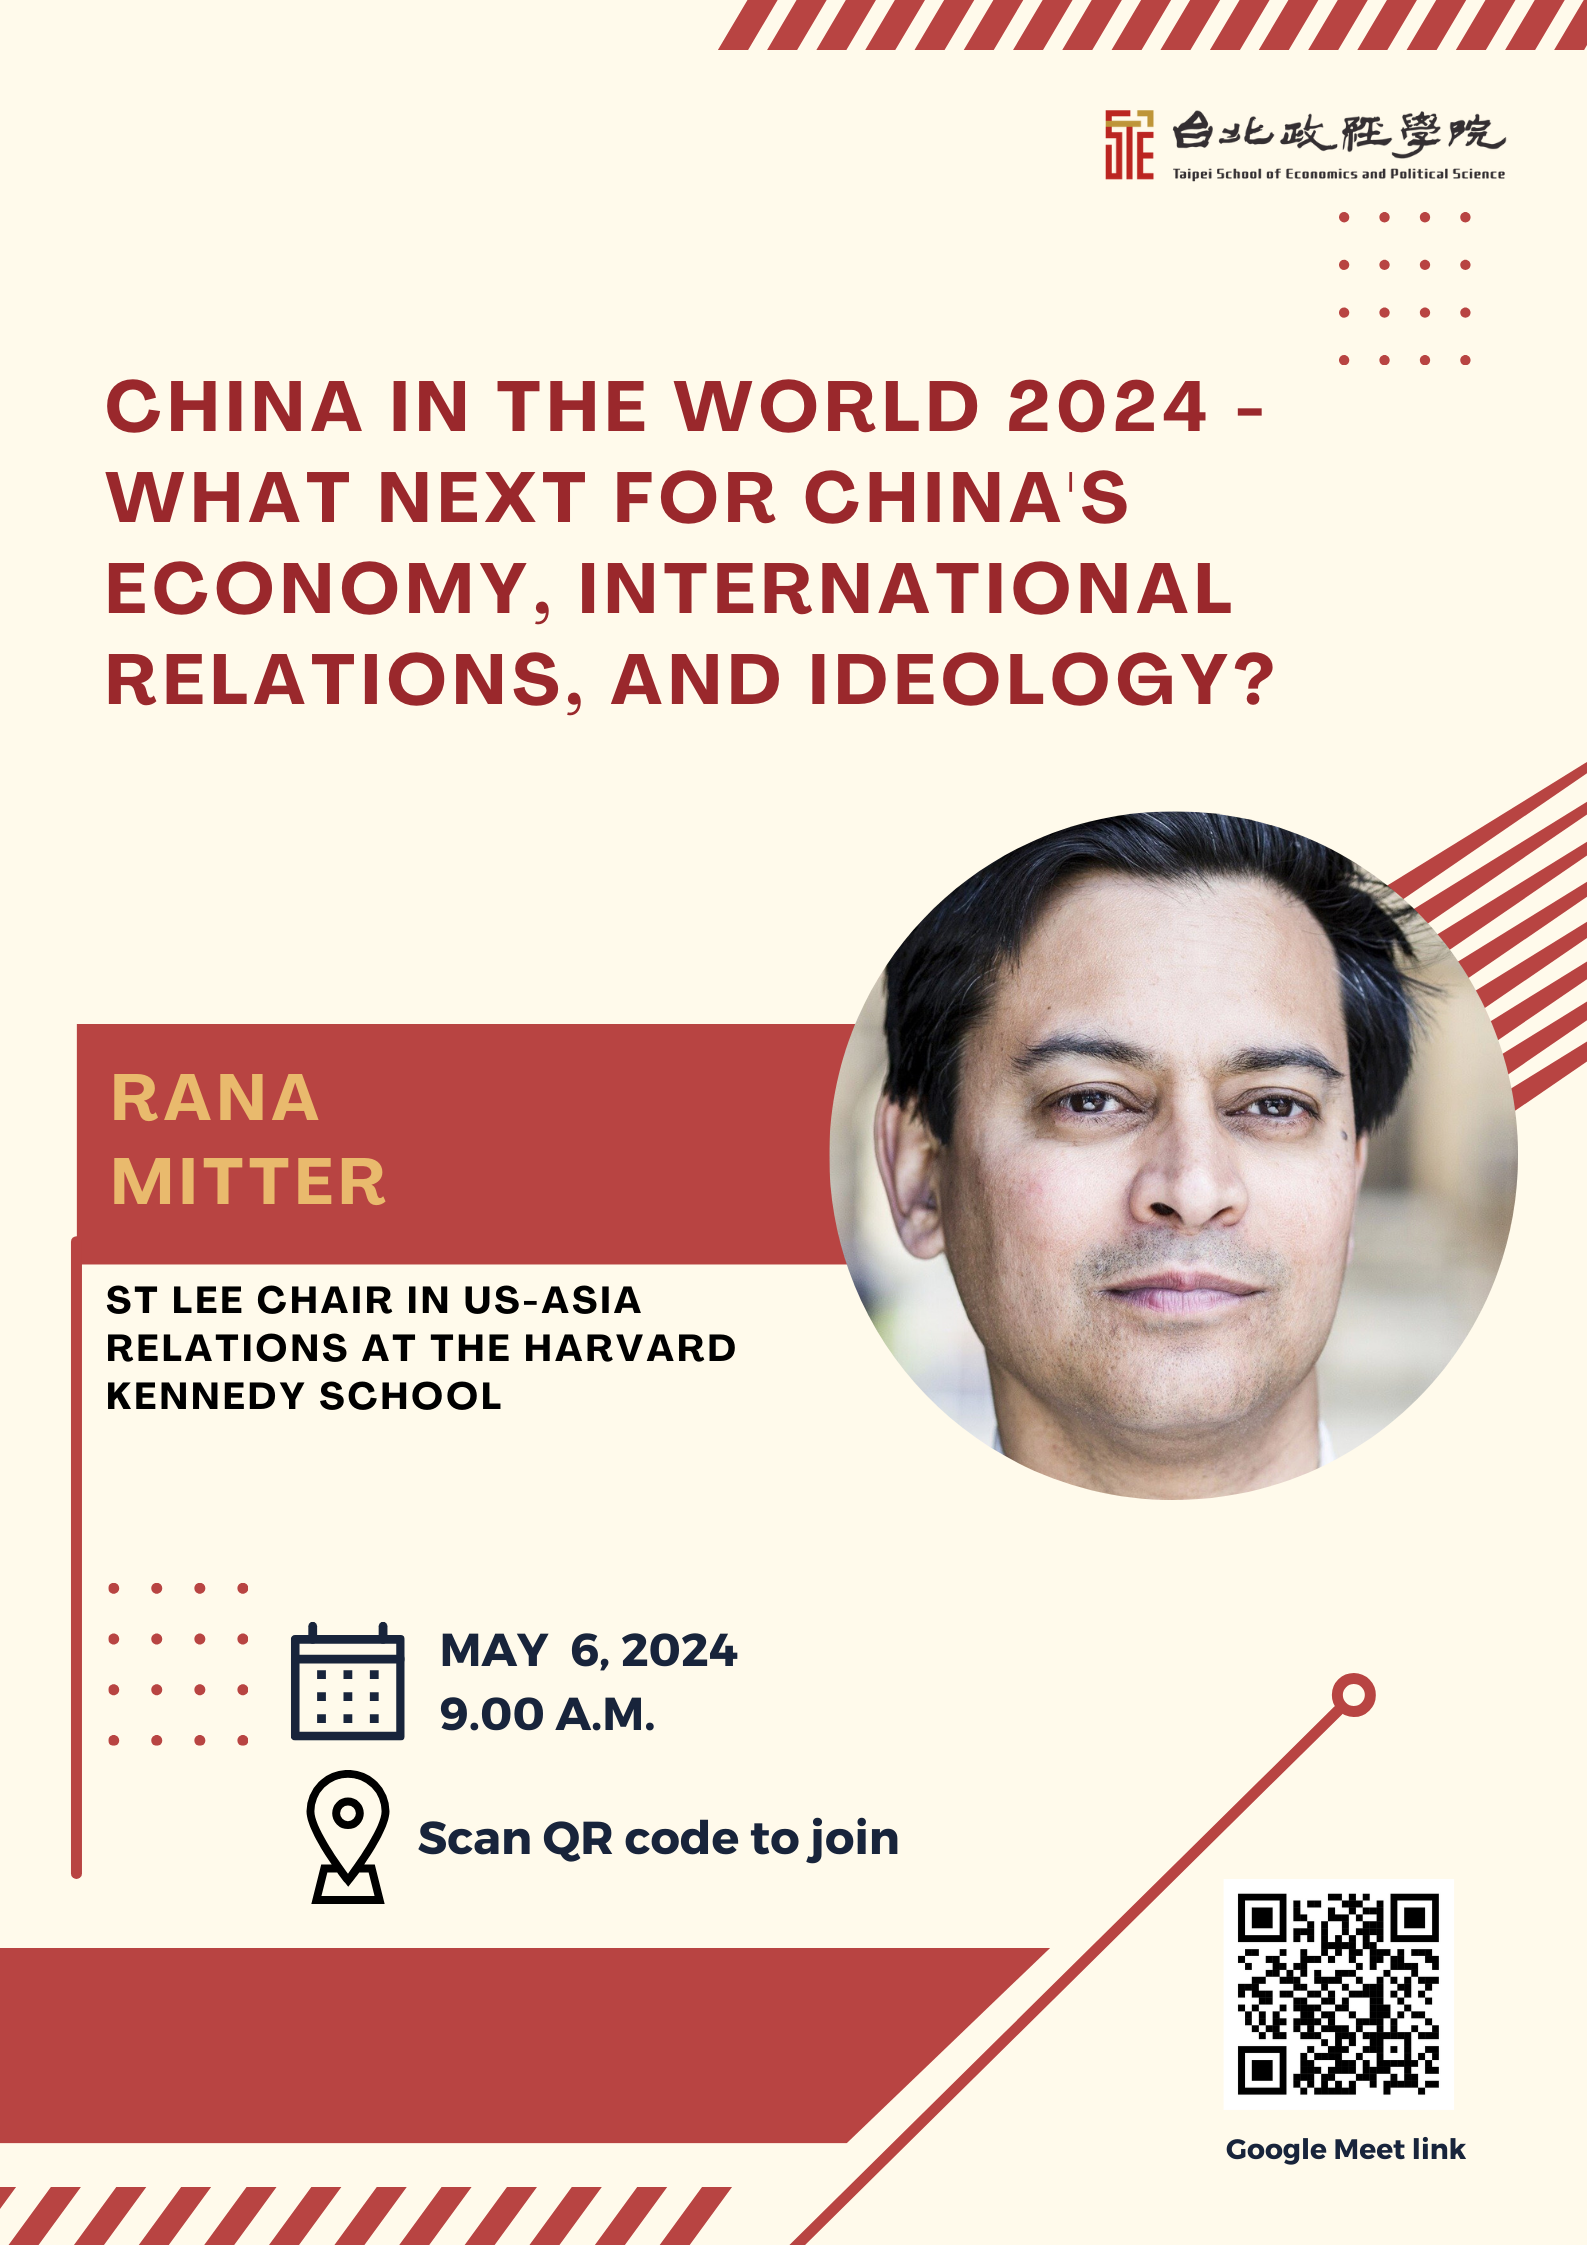 Fall 2023 Seminar Series | China in the World 2024 - what next for China's economy, international relations, and ideology?